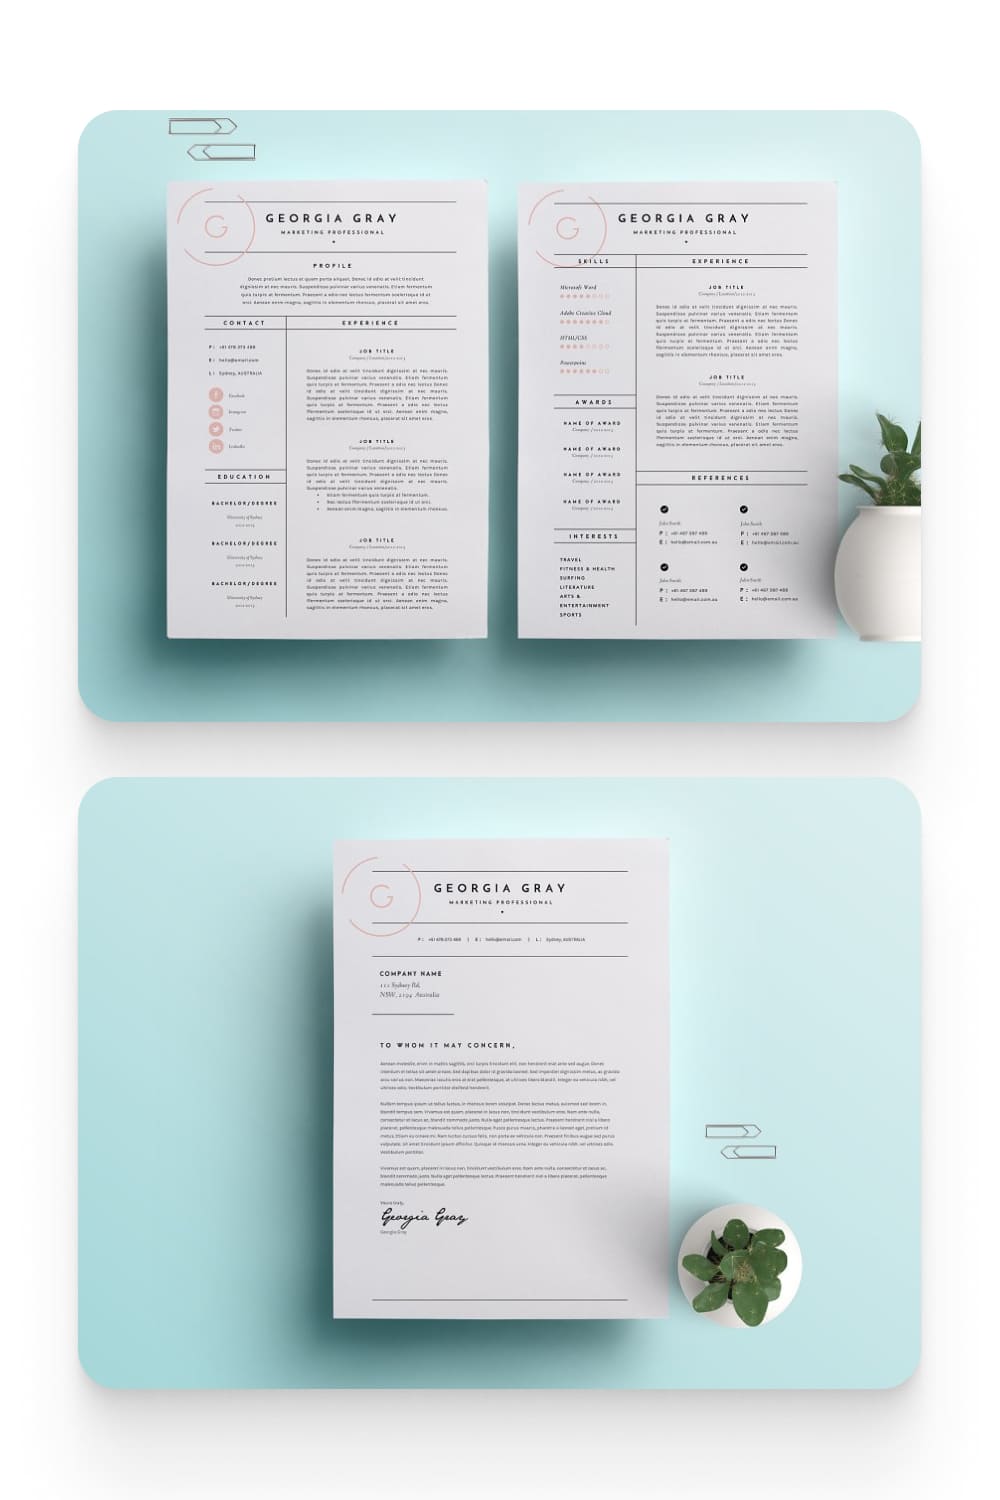 A collage of images from the Resume kit with portfolio, two-column experience and a cover letter.